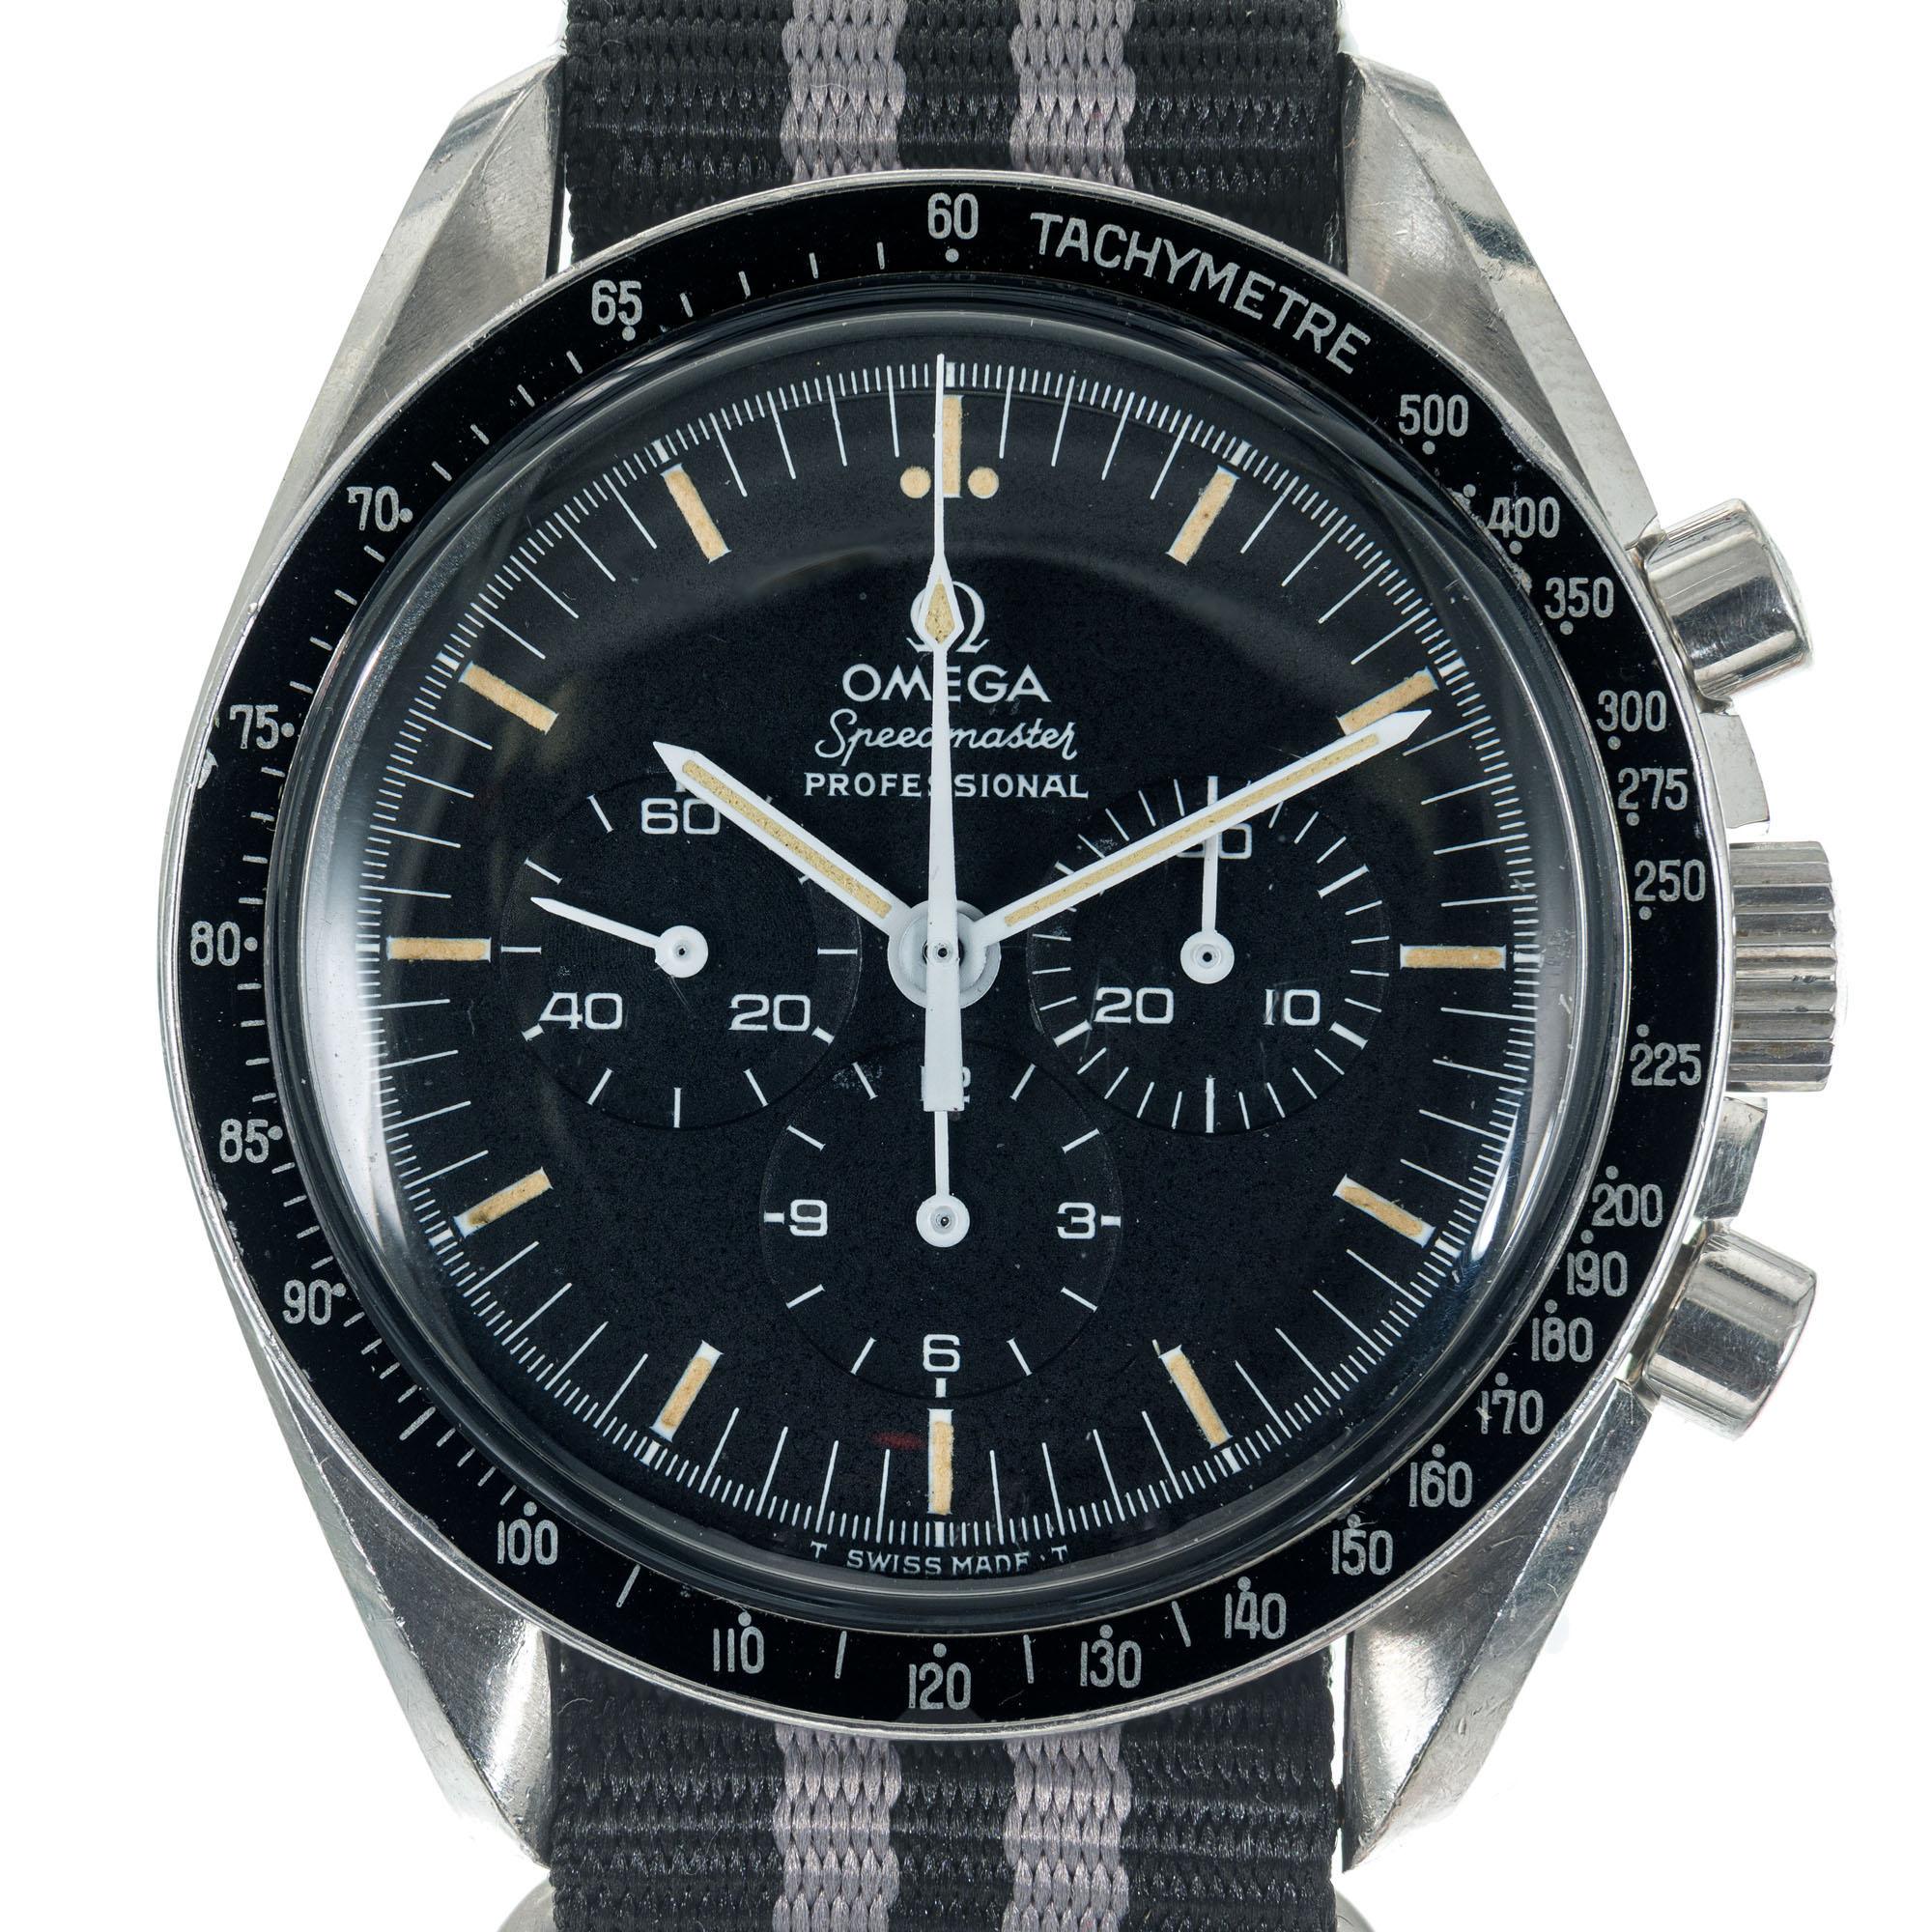 1960's Omega Speedmaster 145022-69 ST. Circa 1969 Natural patina on case. Stainless steel Nato style black and grey band. 

Length: 48.07mm
Width: 20mm
Band width at case: 20mm
Case thickness: 14.56mm
Band: Nato
Crystal: Acrylic
Dial: Black